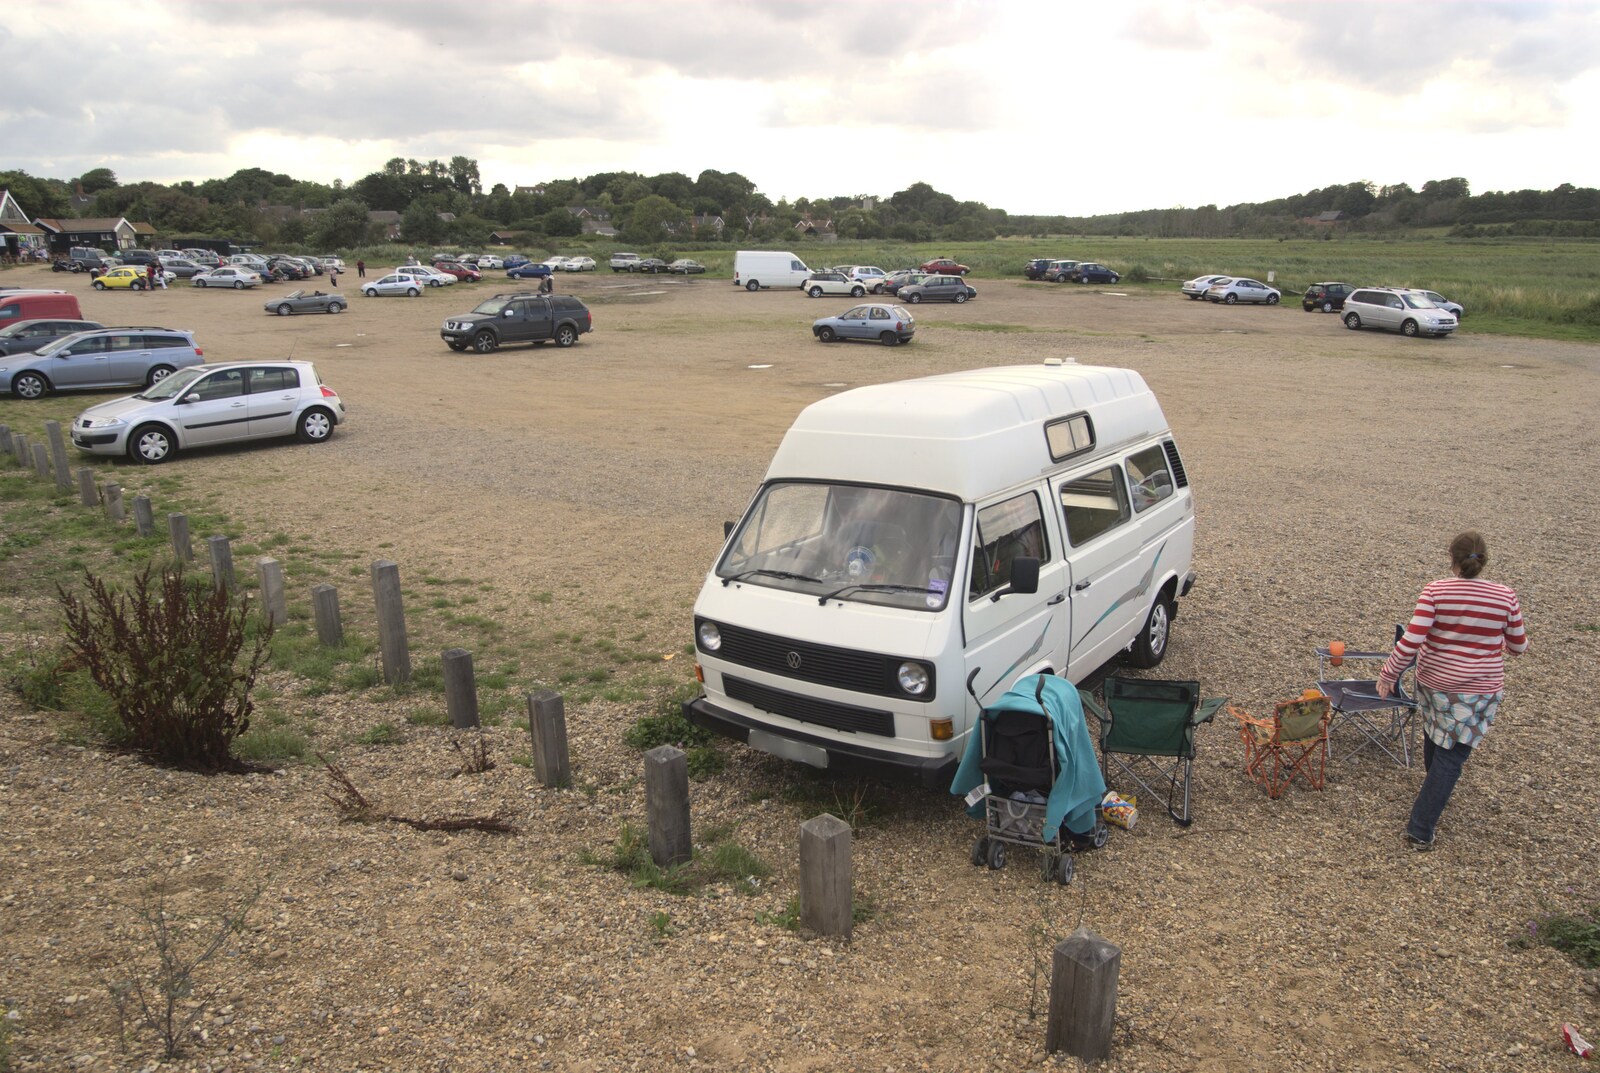 The BSCC at the Beaky, and The Campervan's First Trip, Dunwich and Aldeburgh, Suffolk - 8th August 2010: The camper van in Dunwich beach car park